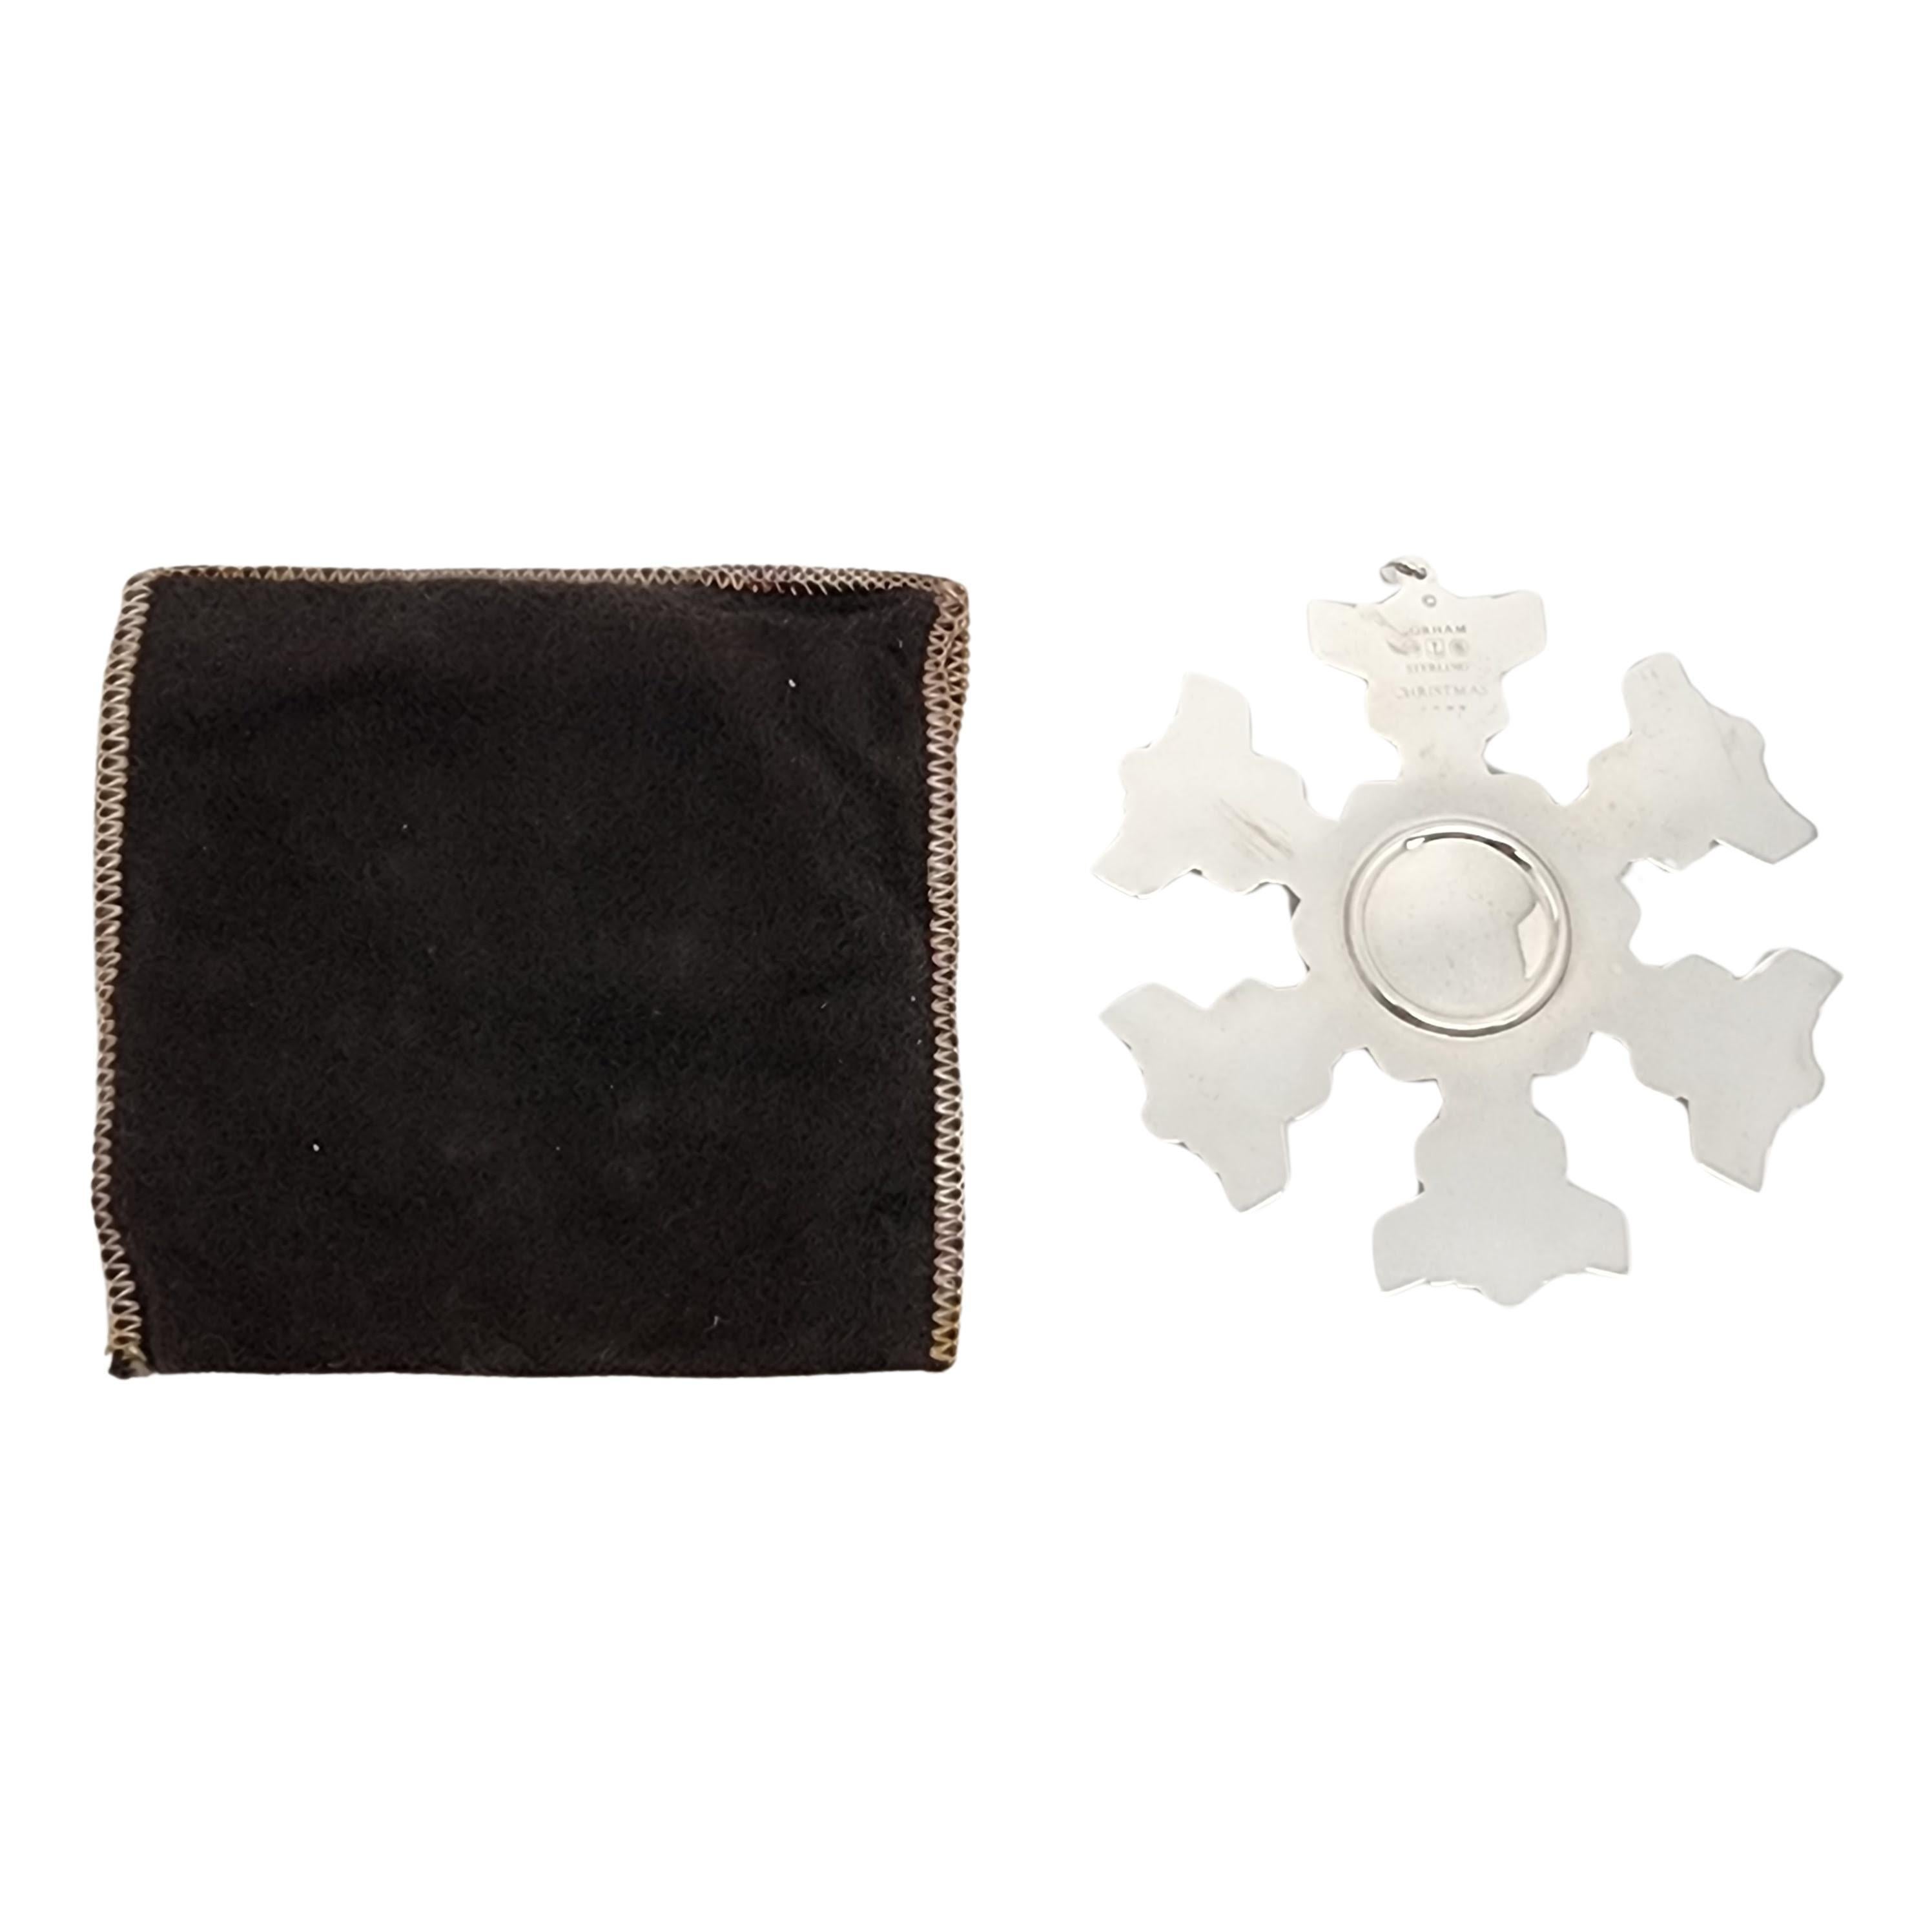 Gorham sterling silver snowflake ornament from 1977 with pouch.

Since 1970, Gorham has been celebrating the season with a yearly version of the classic snowflake form, creating a beautiful tradition of sparkling art. Includes original Gorham felt